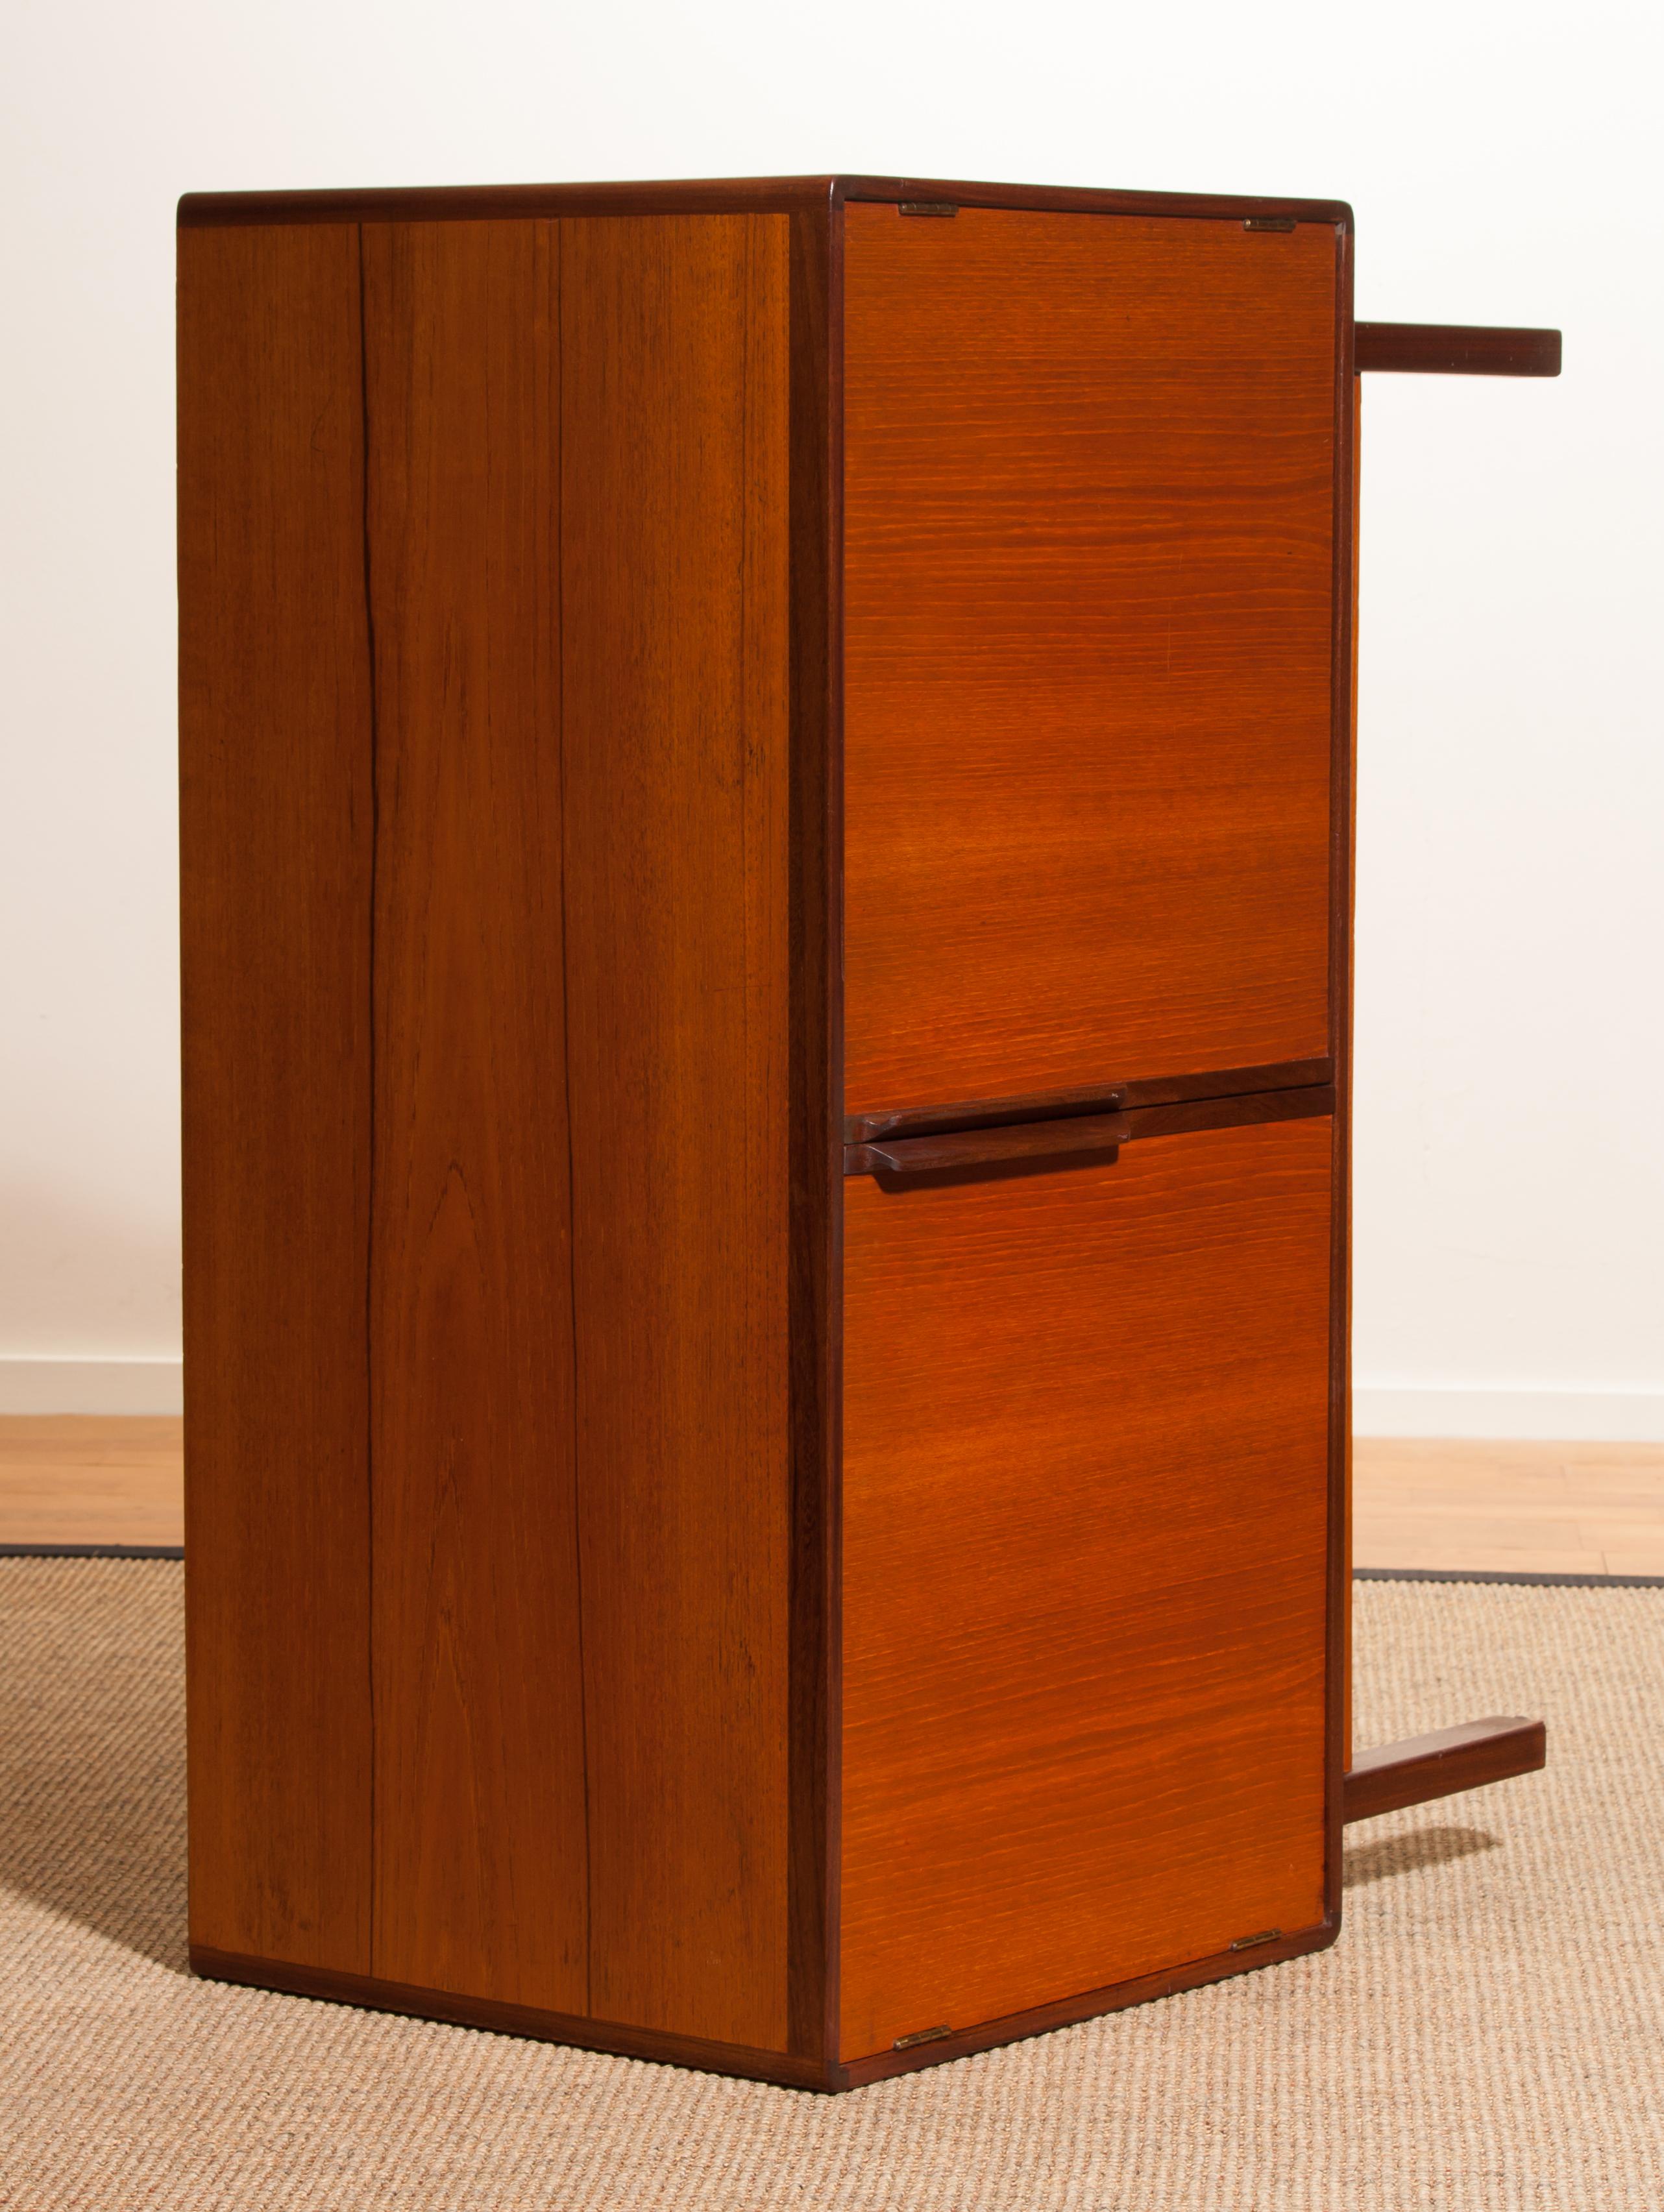 Mid-20th Century 1960s, Teak and Palisander Small Sideboard Cabinet by Asko Finland